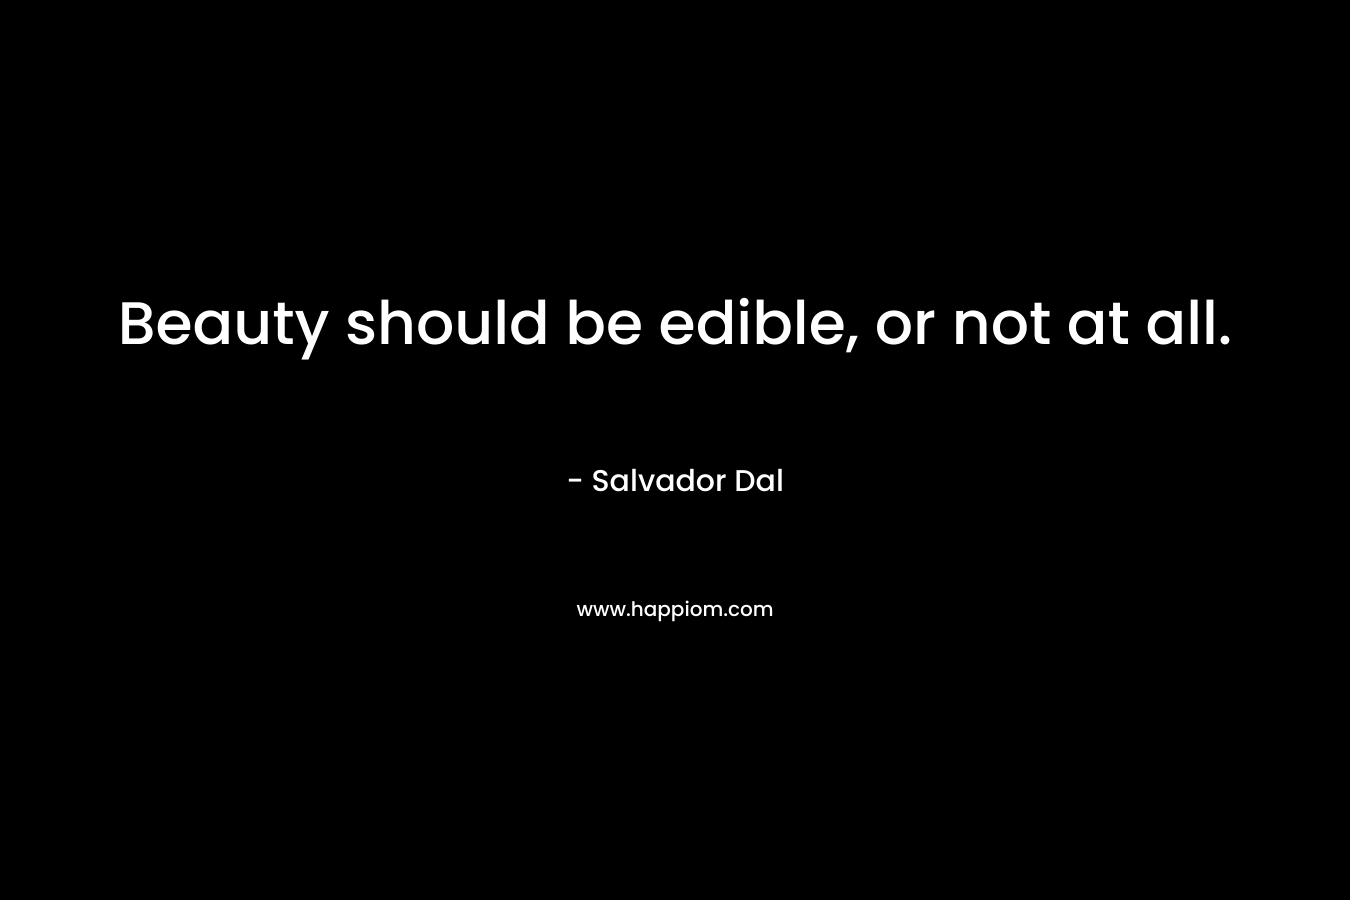 Beauty should be edible, or not at all.